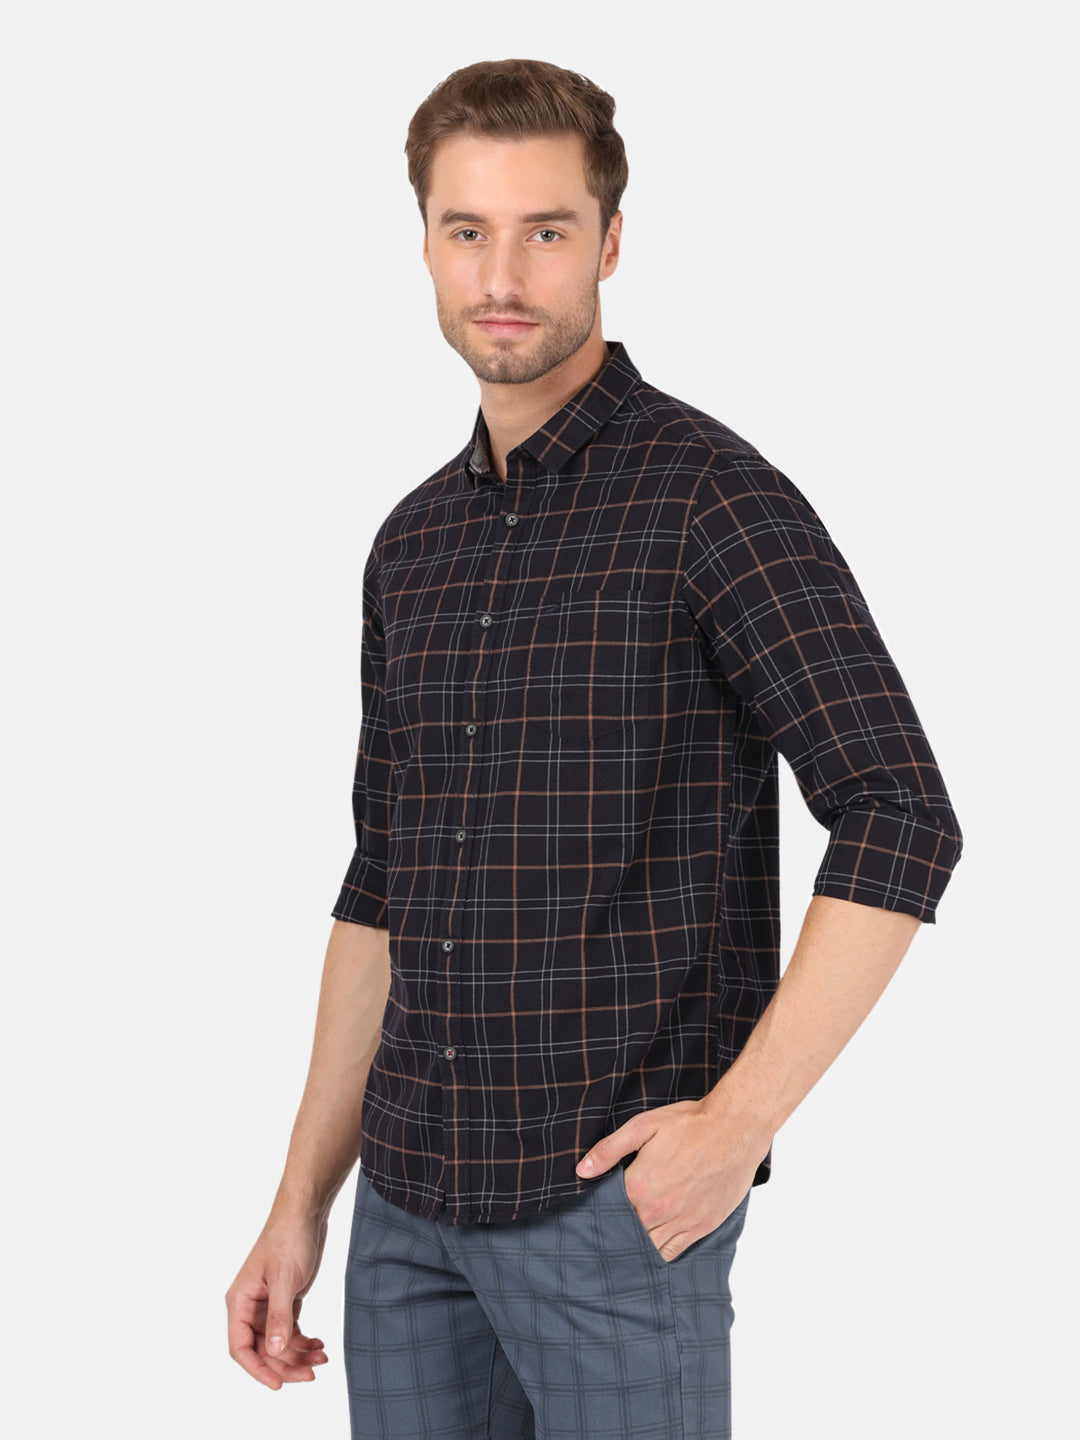 Casual Full Sleeve Comfort Fit Checks Dark Brown with Collar Shirt for Men